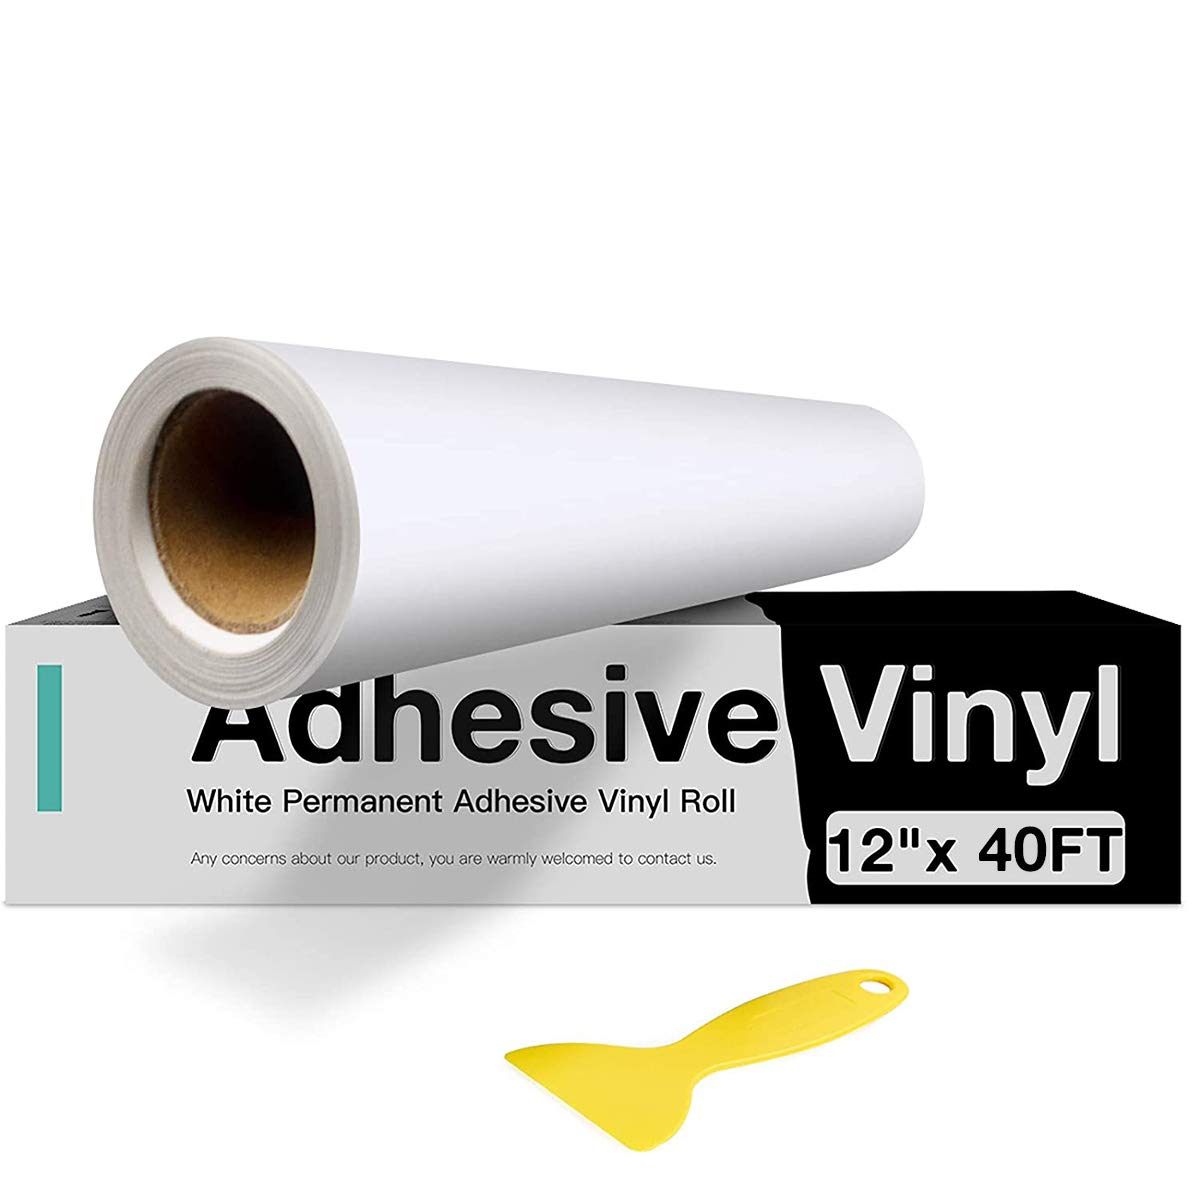  HTVRONT Black Permanent Vinyl, Black Adhesive Vinyl for Cricut  - 12 x 40 FT Black Vinyl Roll for Cricut, Silhouette, Cameo Cutters,  Signs, Scrapbooking, Craft, Die Cutters : Arts, Crafts & Sewing